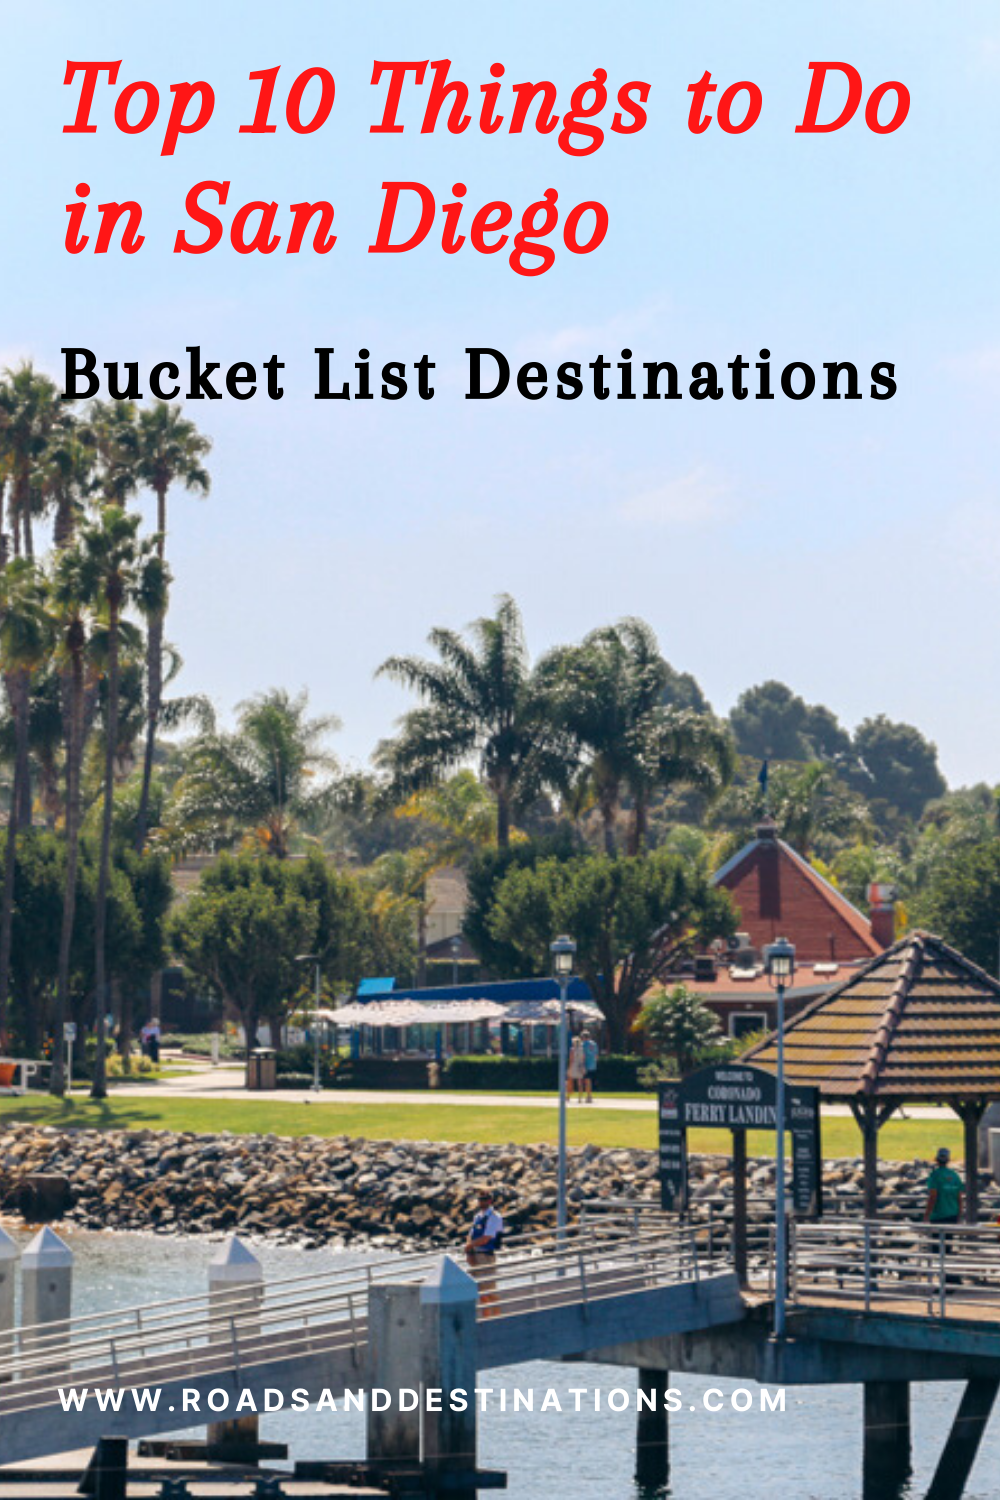 10 Absolute Best Things to Do in San Diego. Bucket List, Tips, and Map - Roads and Destinations